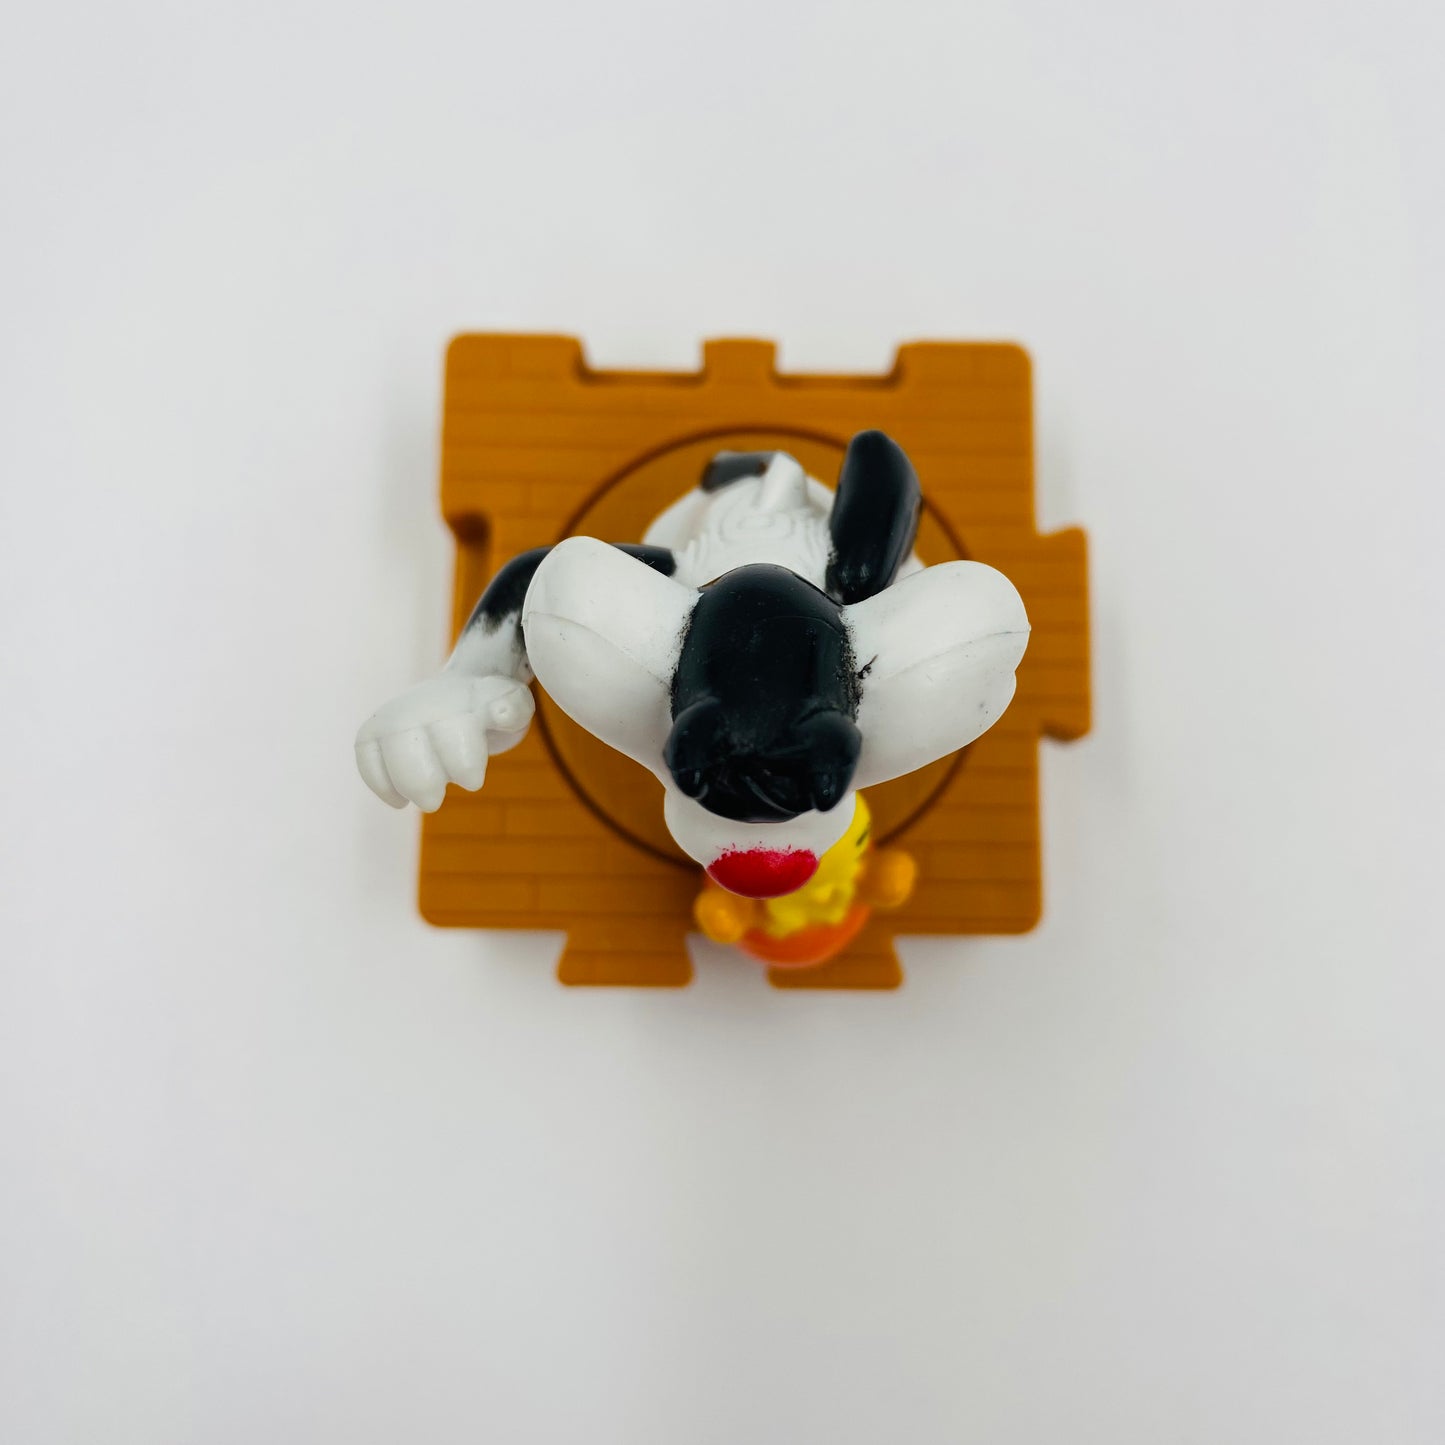 Space Jam Sylvester & Tweety McDonald's Happy Meal toy (1996) loose